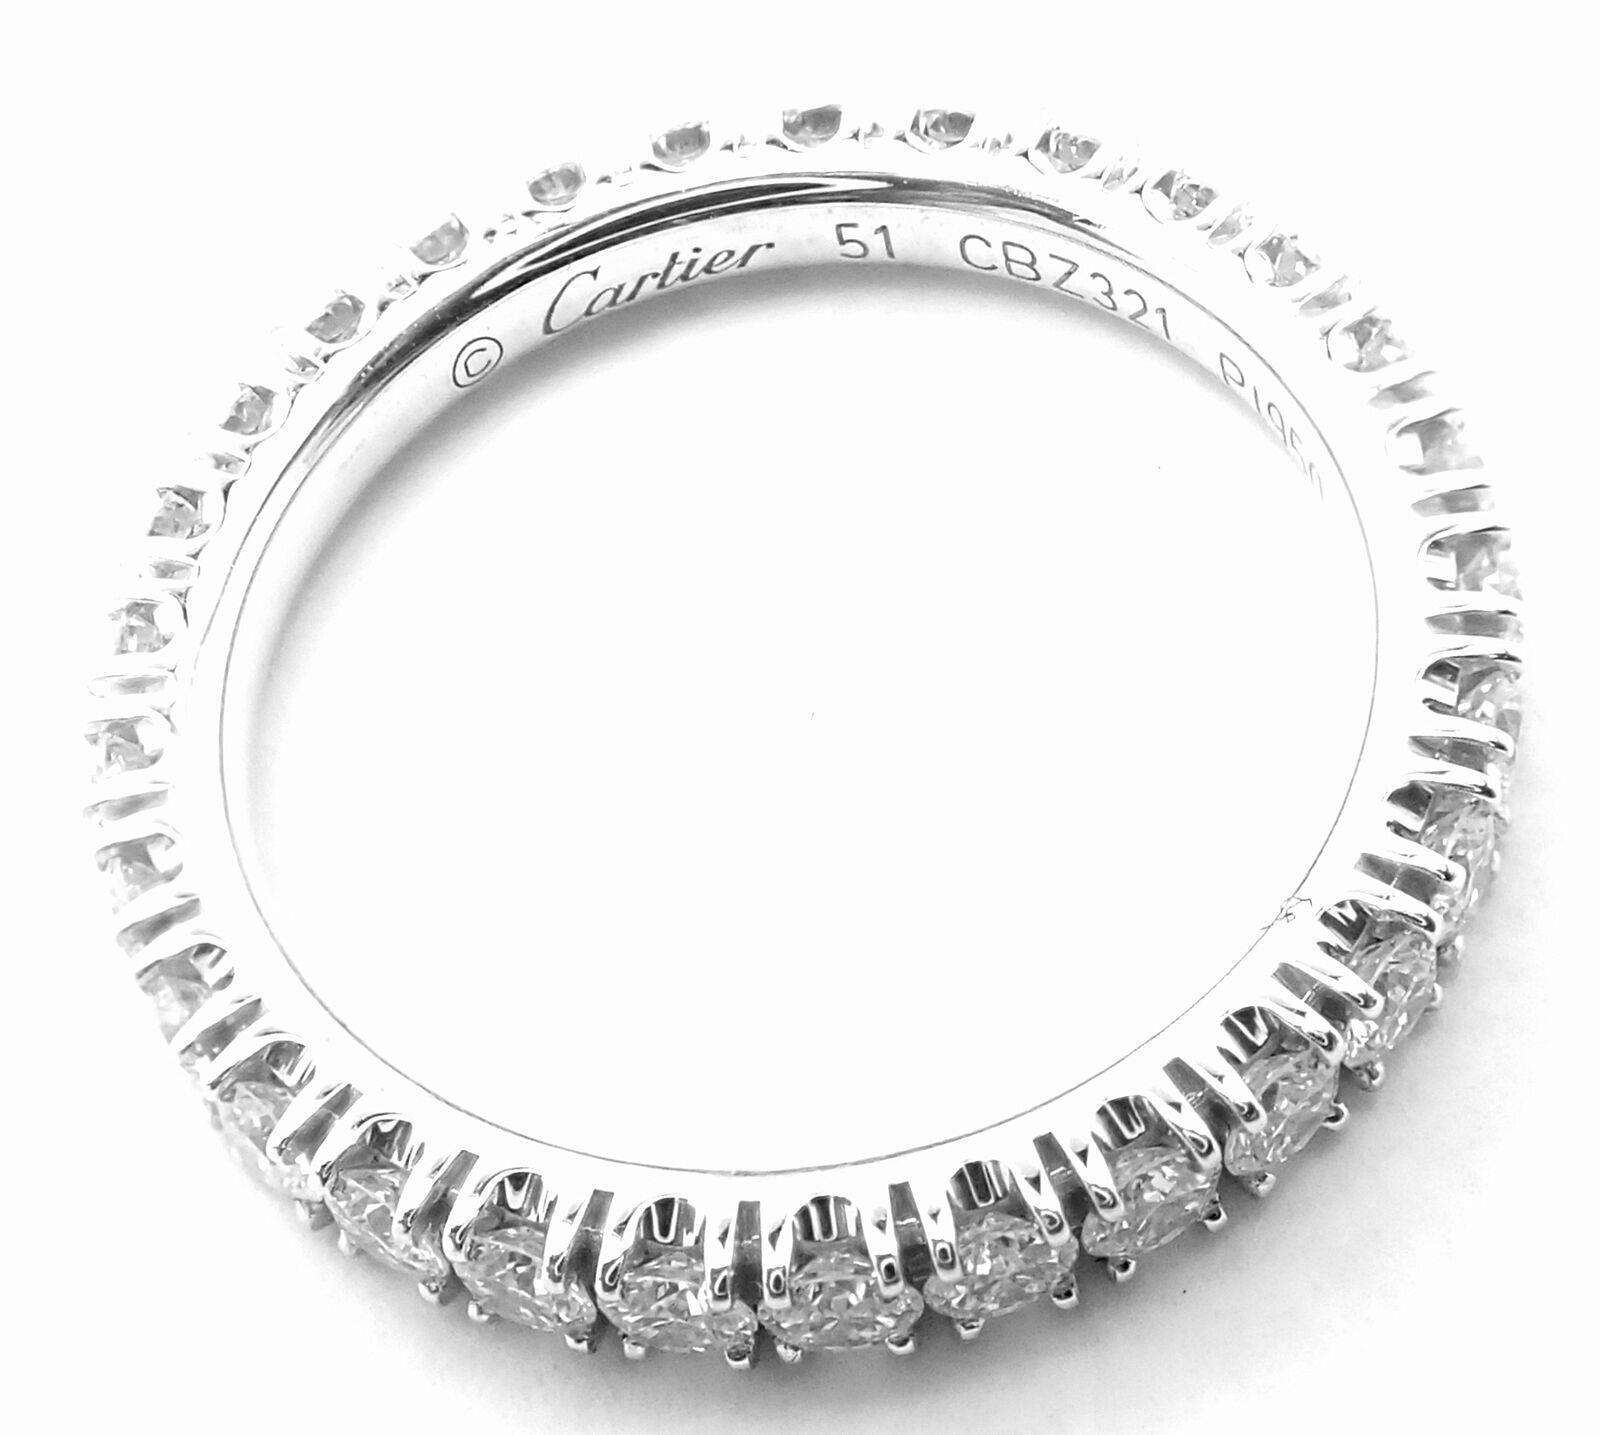 Cartier Jewelry & Watches:Fine Jewelry:Rings Cartier Étincelle De Cartier Platinum Diamond Eternity Band Ring Size 51 US 5.75